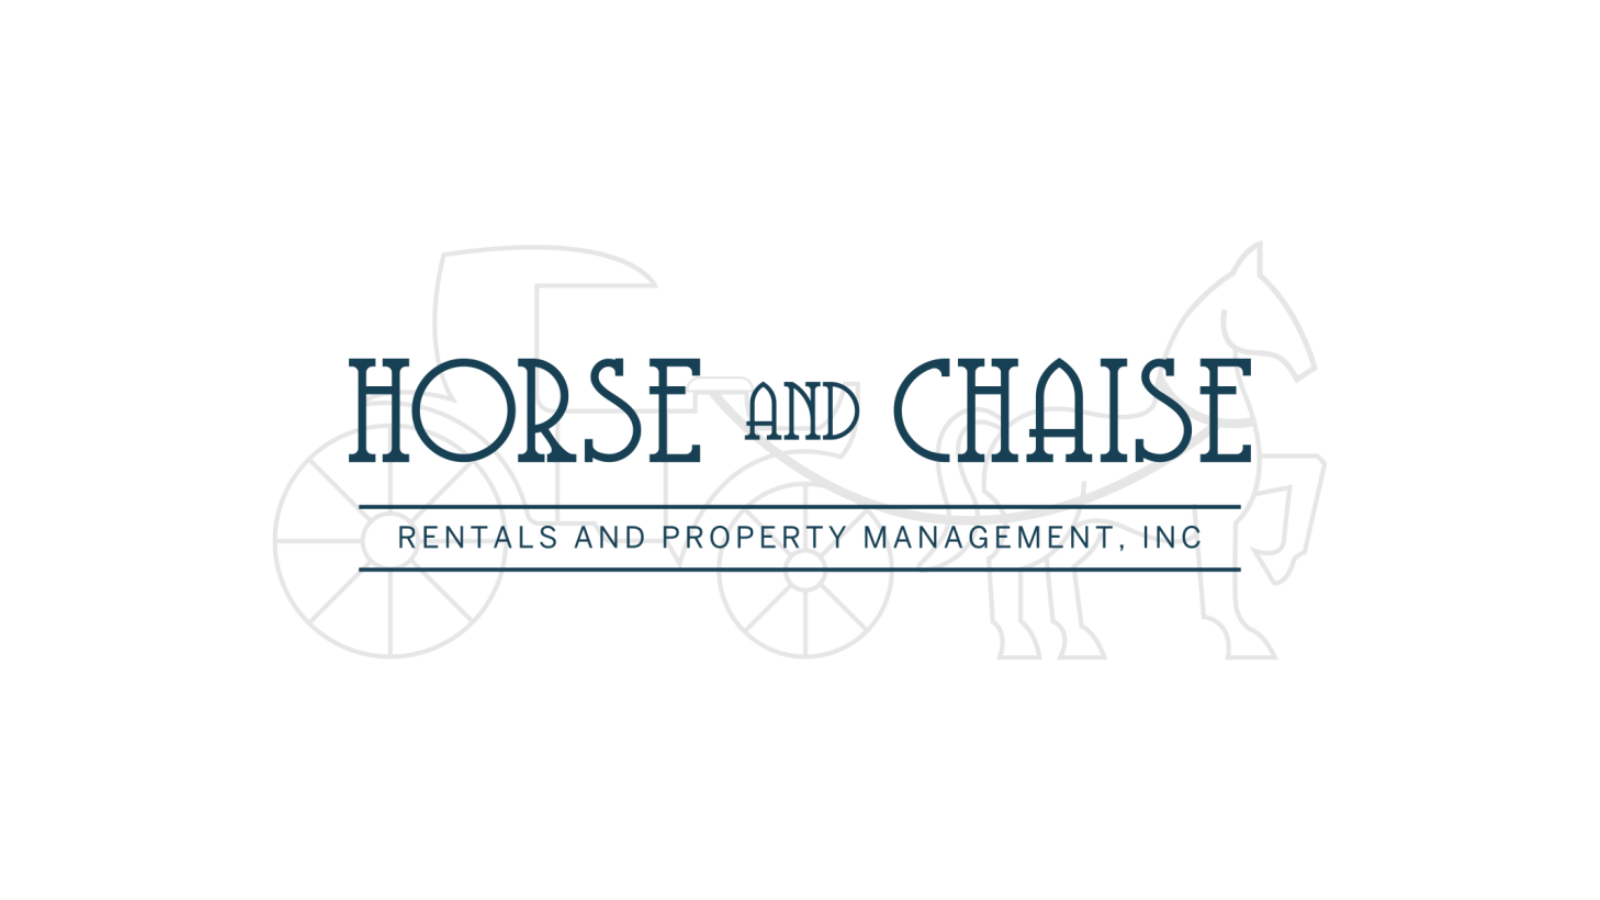 Horse and Chaise Rental s & Property Management